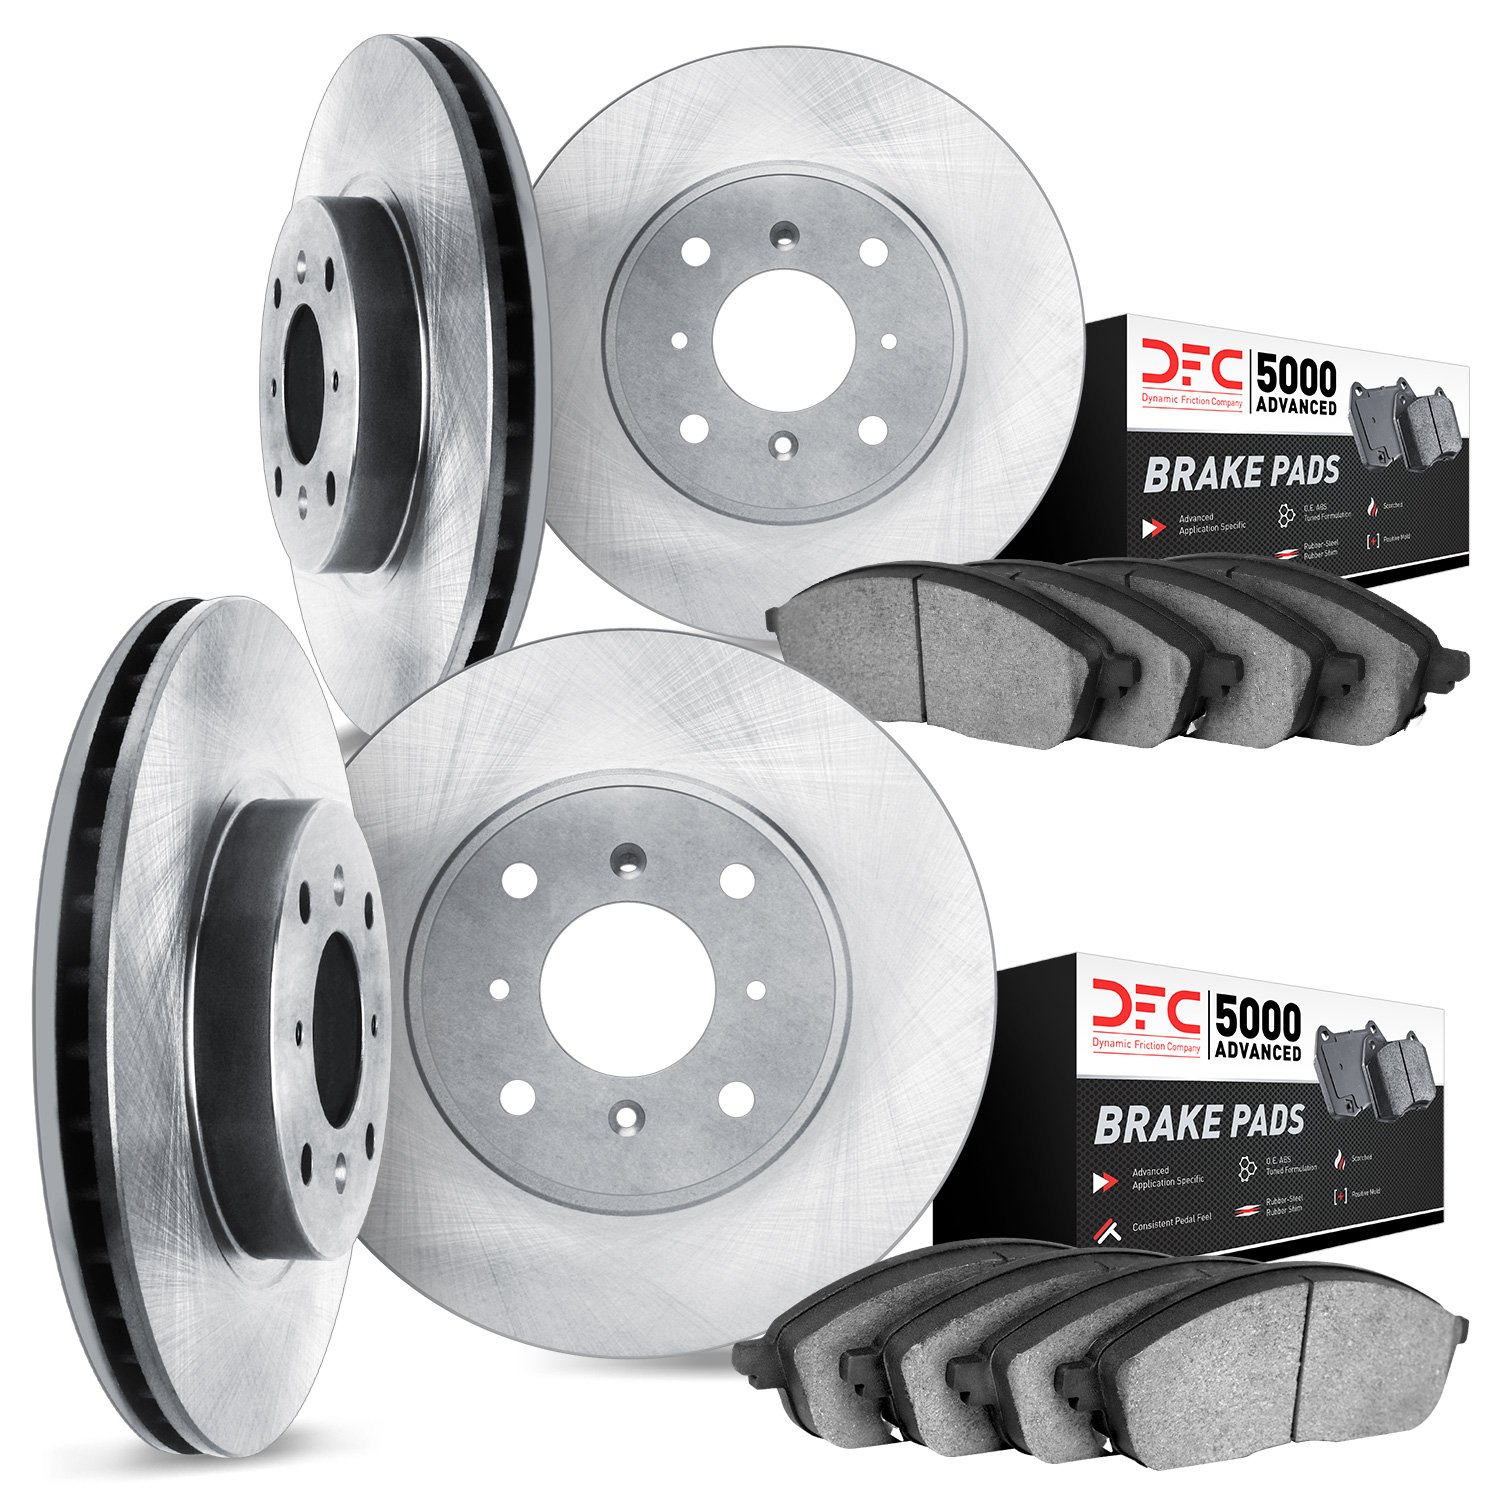 6504-56103 Brake Rotors w/5000 Advanced Brake Pads Kit, 1999-2000 Ford/Lincoln/Mercury/Mazda, Position: Front and Rear